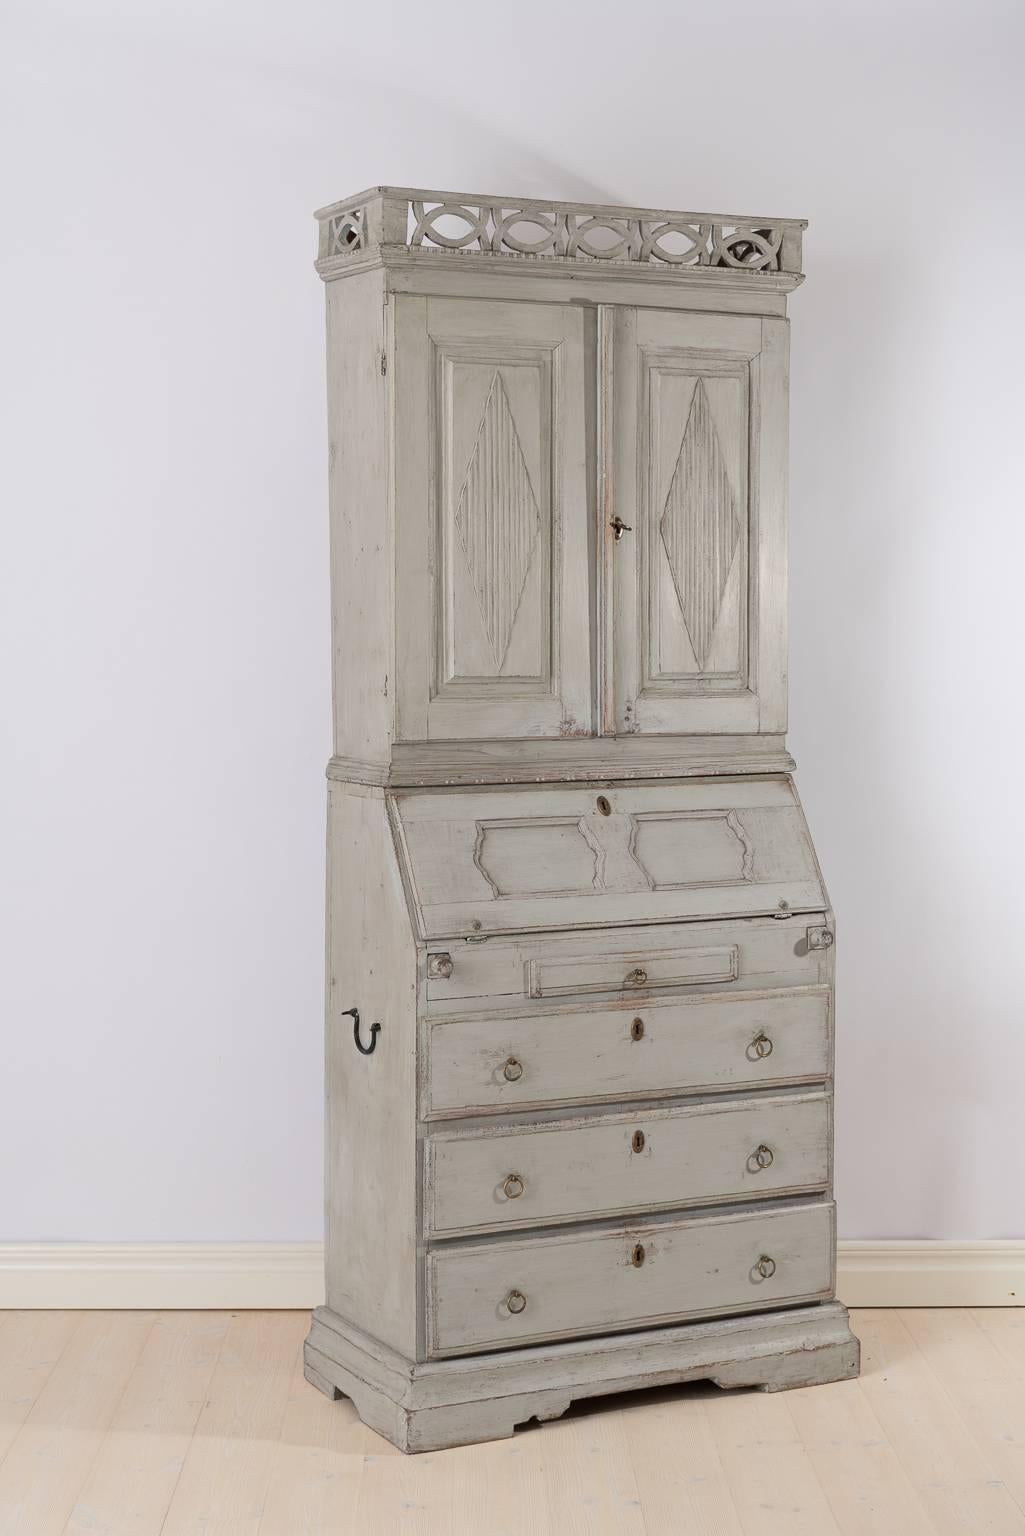 Top cabinet with ridged doors and unusual decorative interior. Bottom part with drawers and drop front desk. 
Original lock, key and side handles.